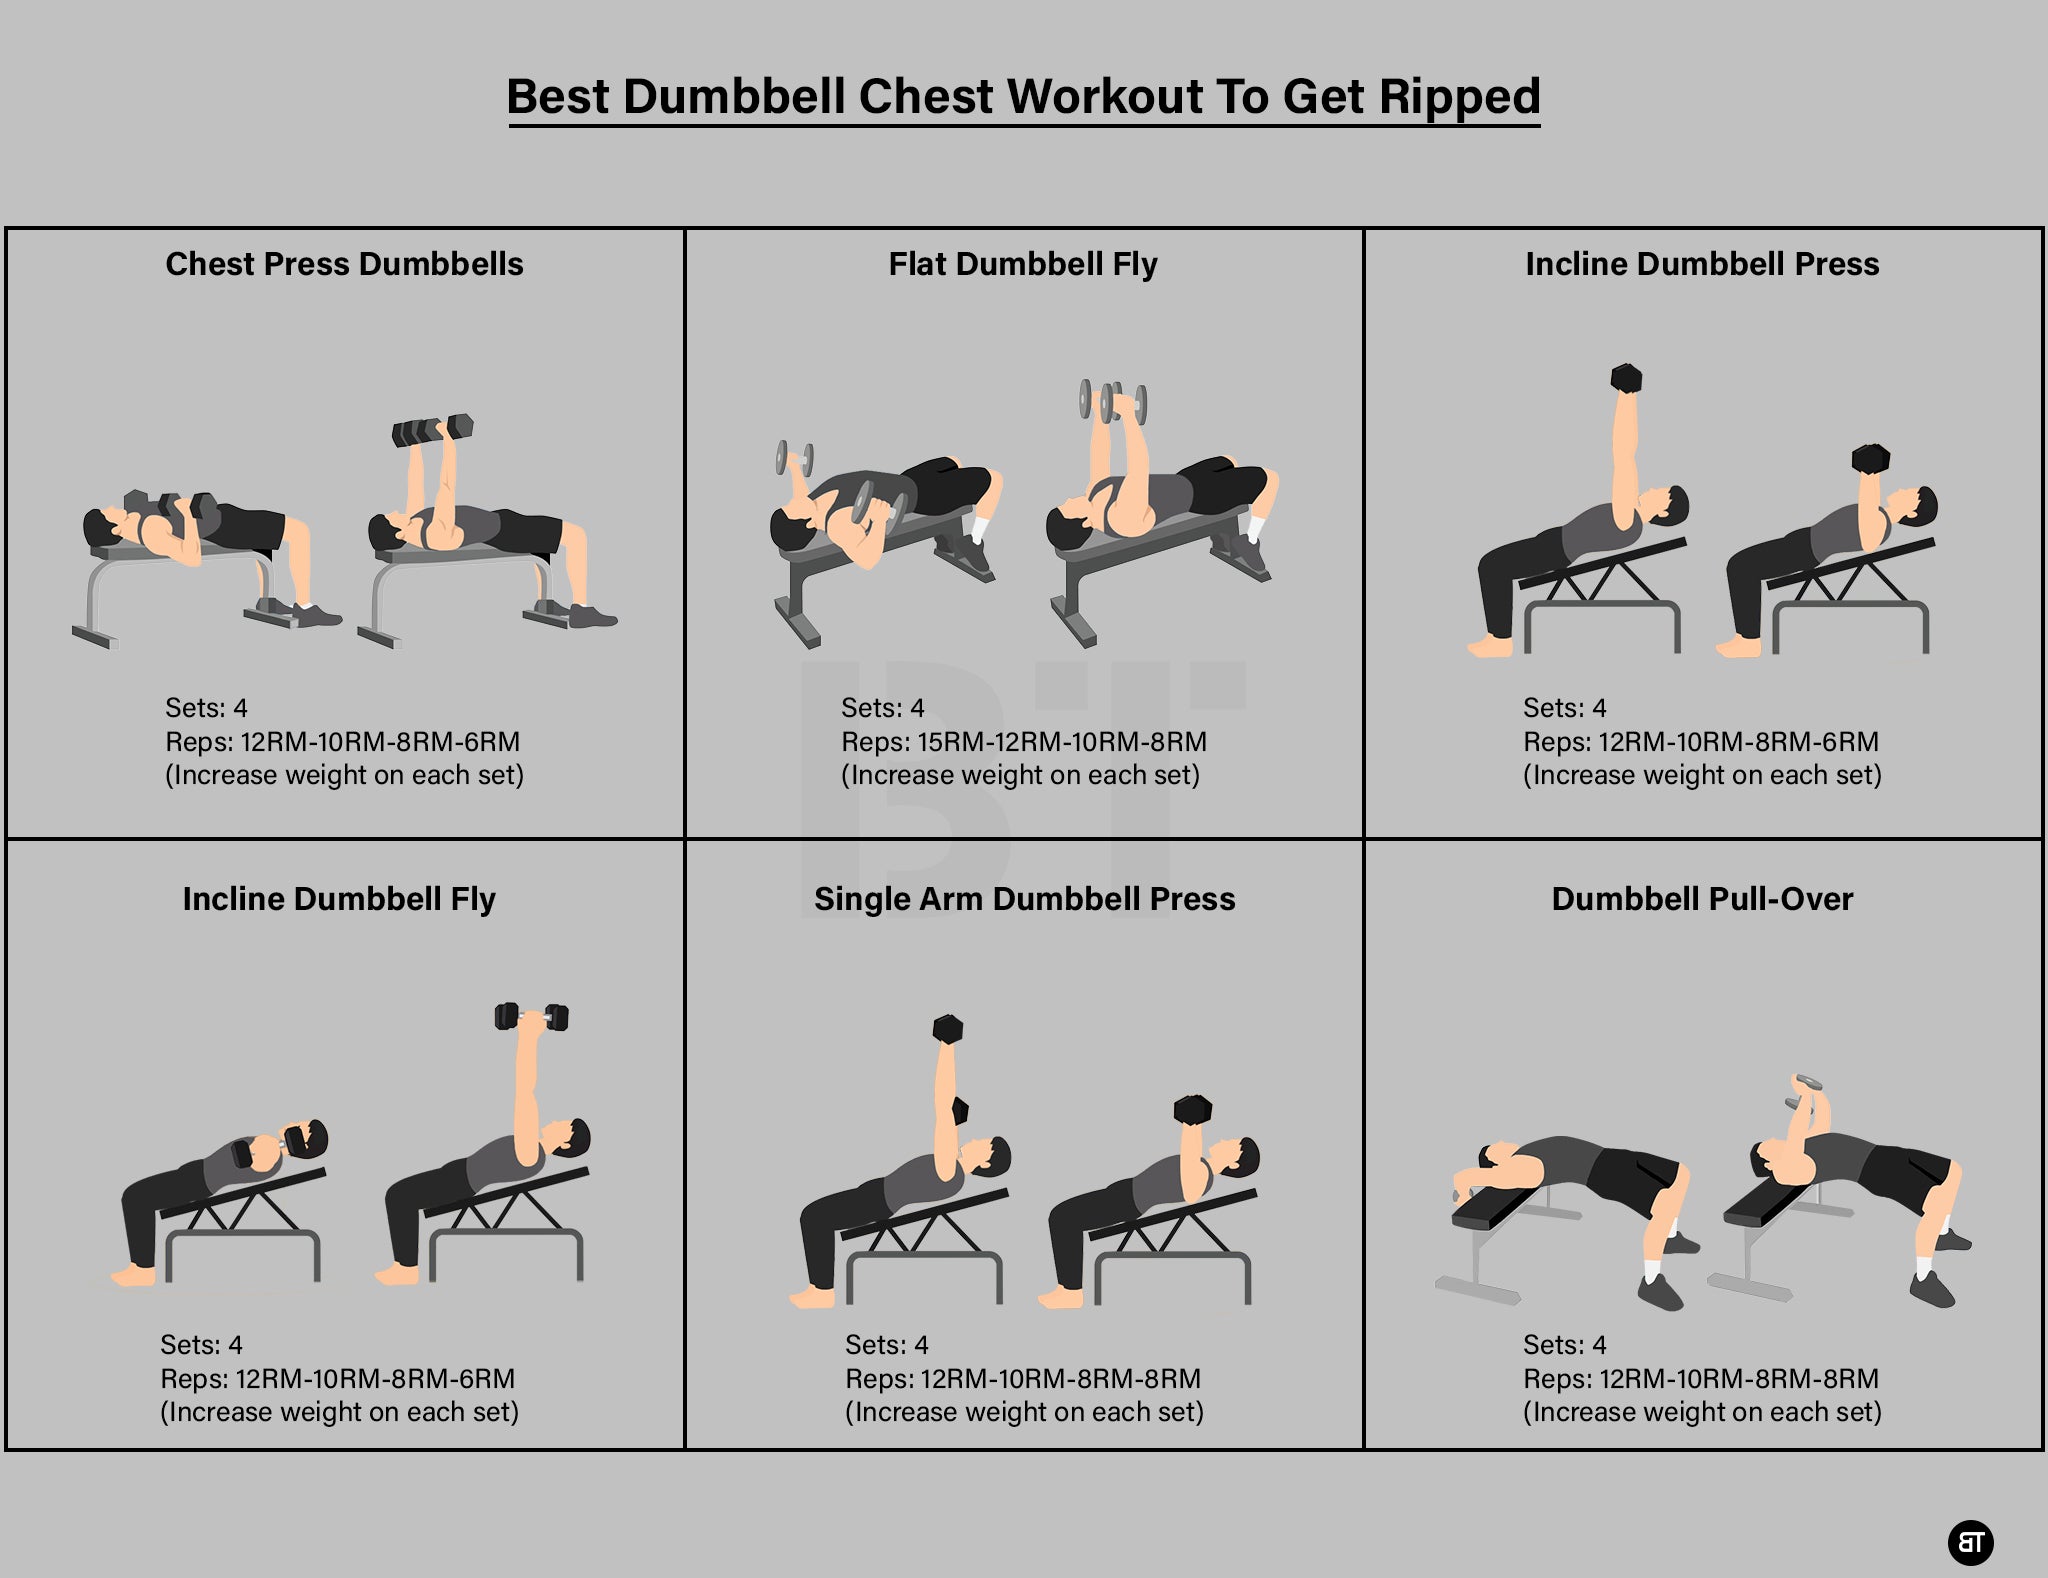 Best Dumbbell Chest Workout To Get Ripped Born Tough